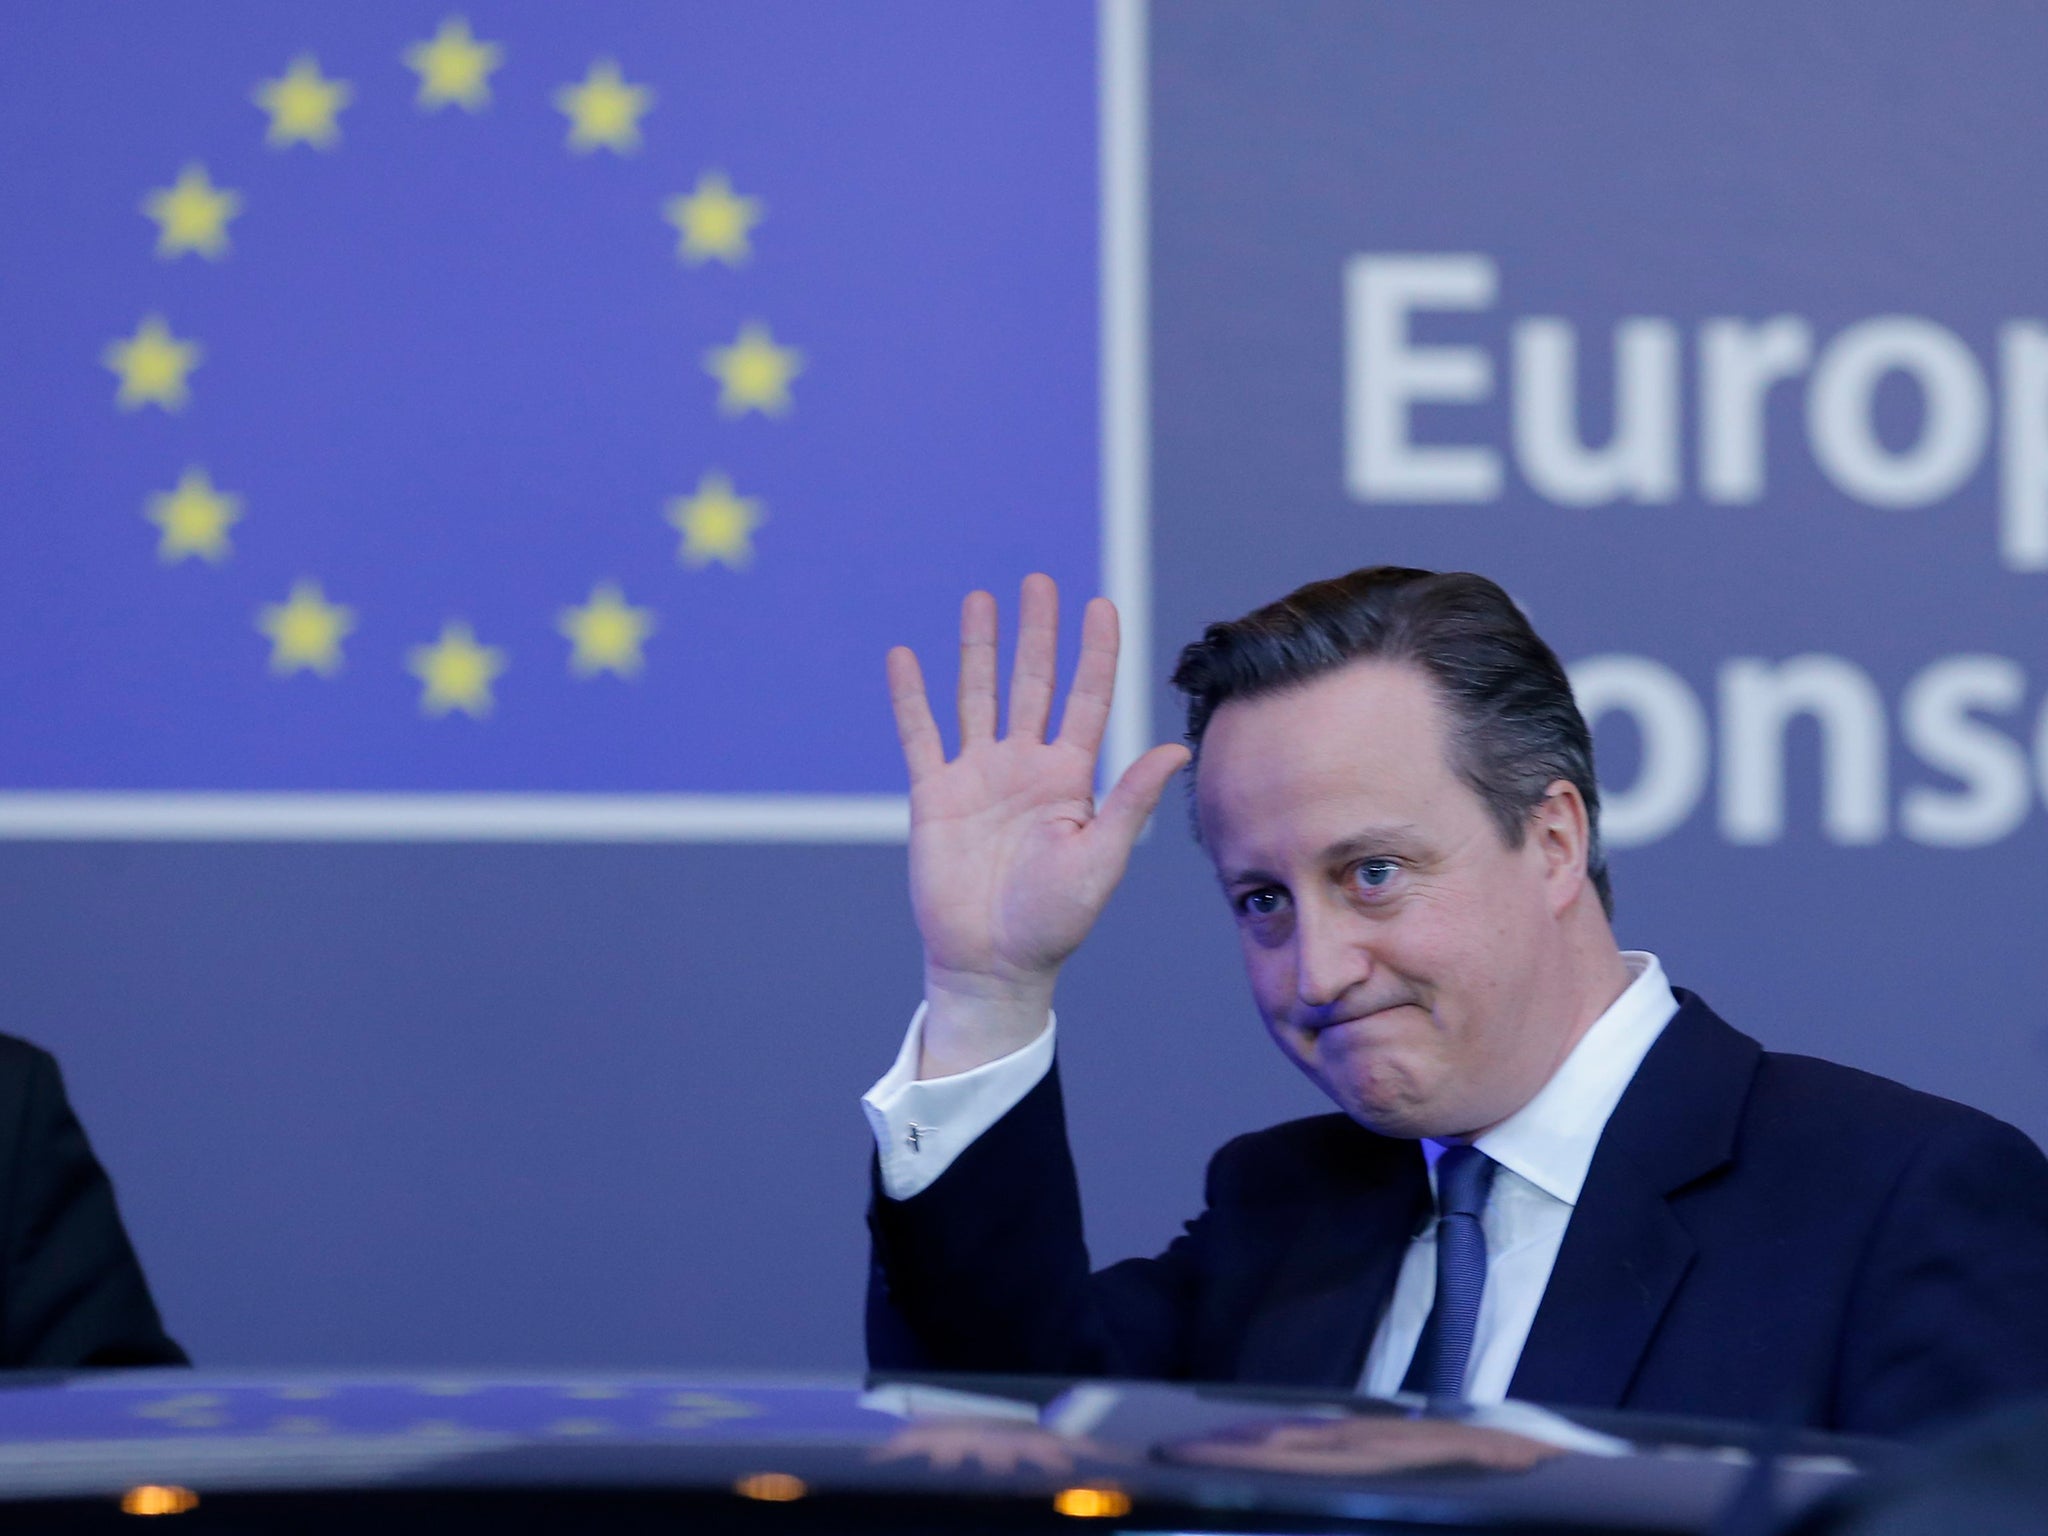 David Cameron's EU deal has left some Tories wanting to leave the bloc